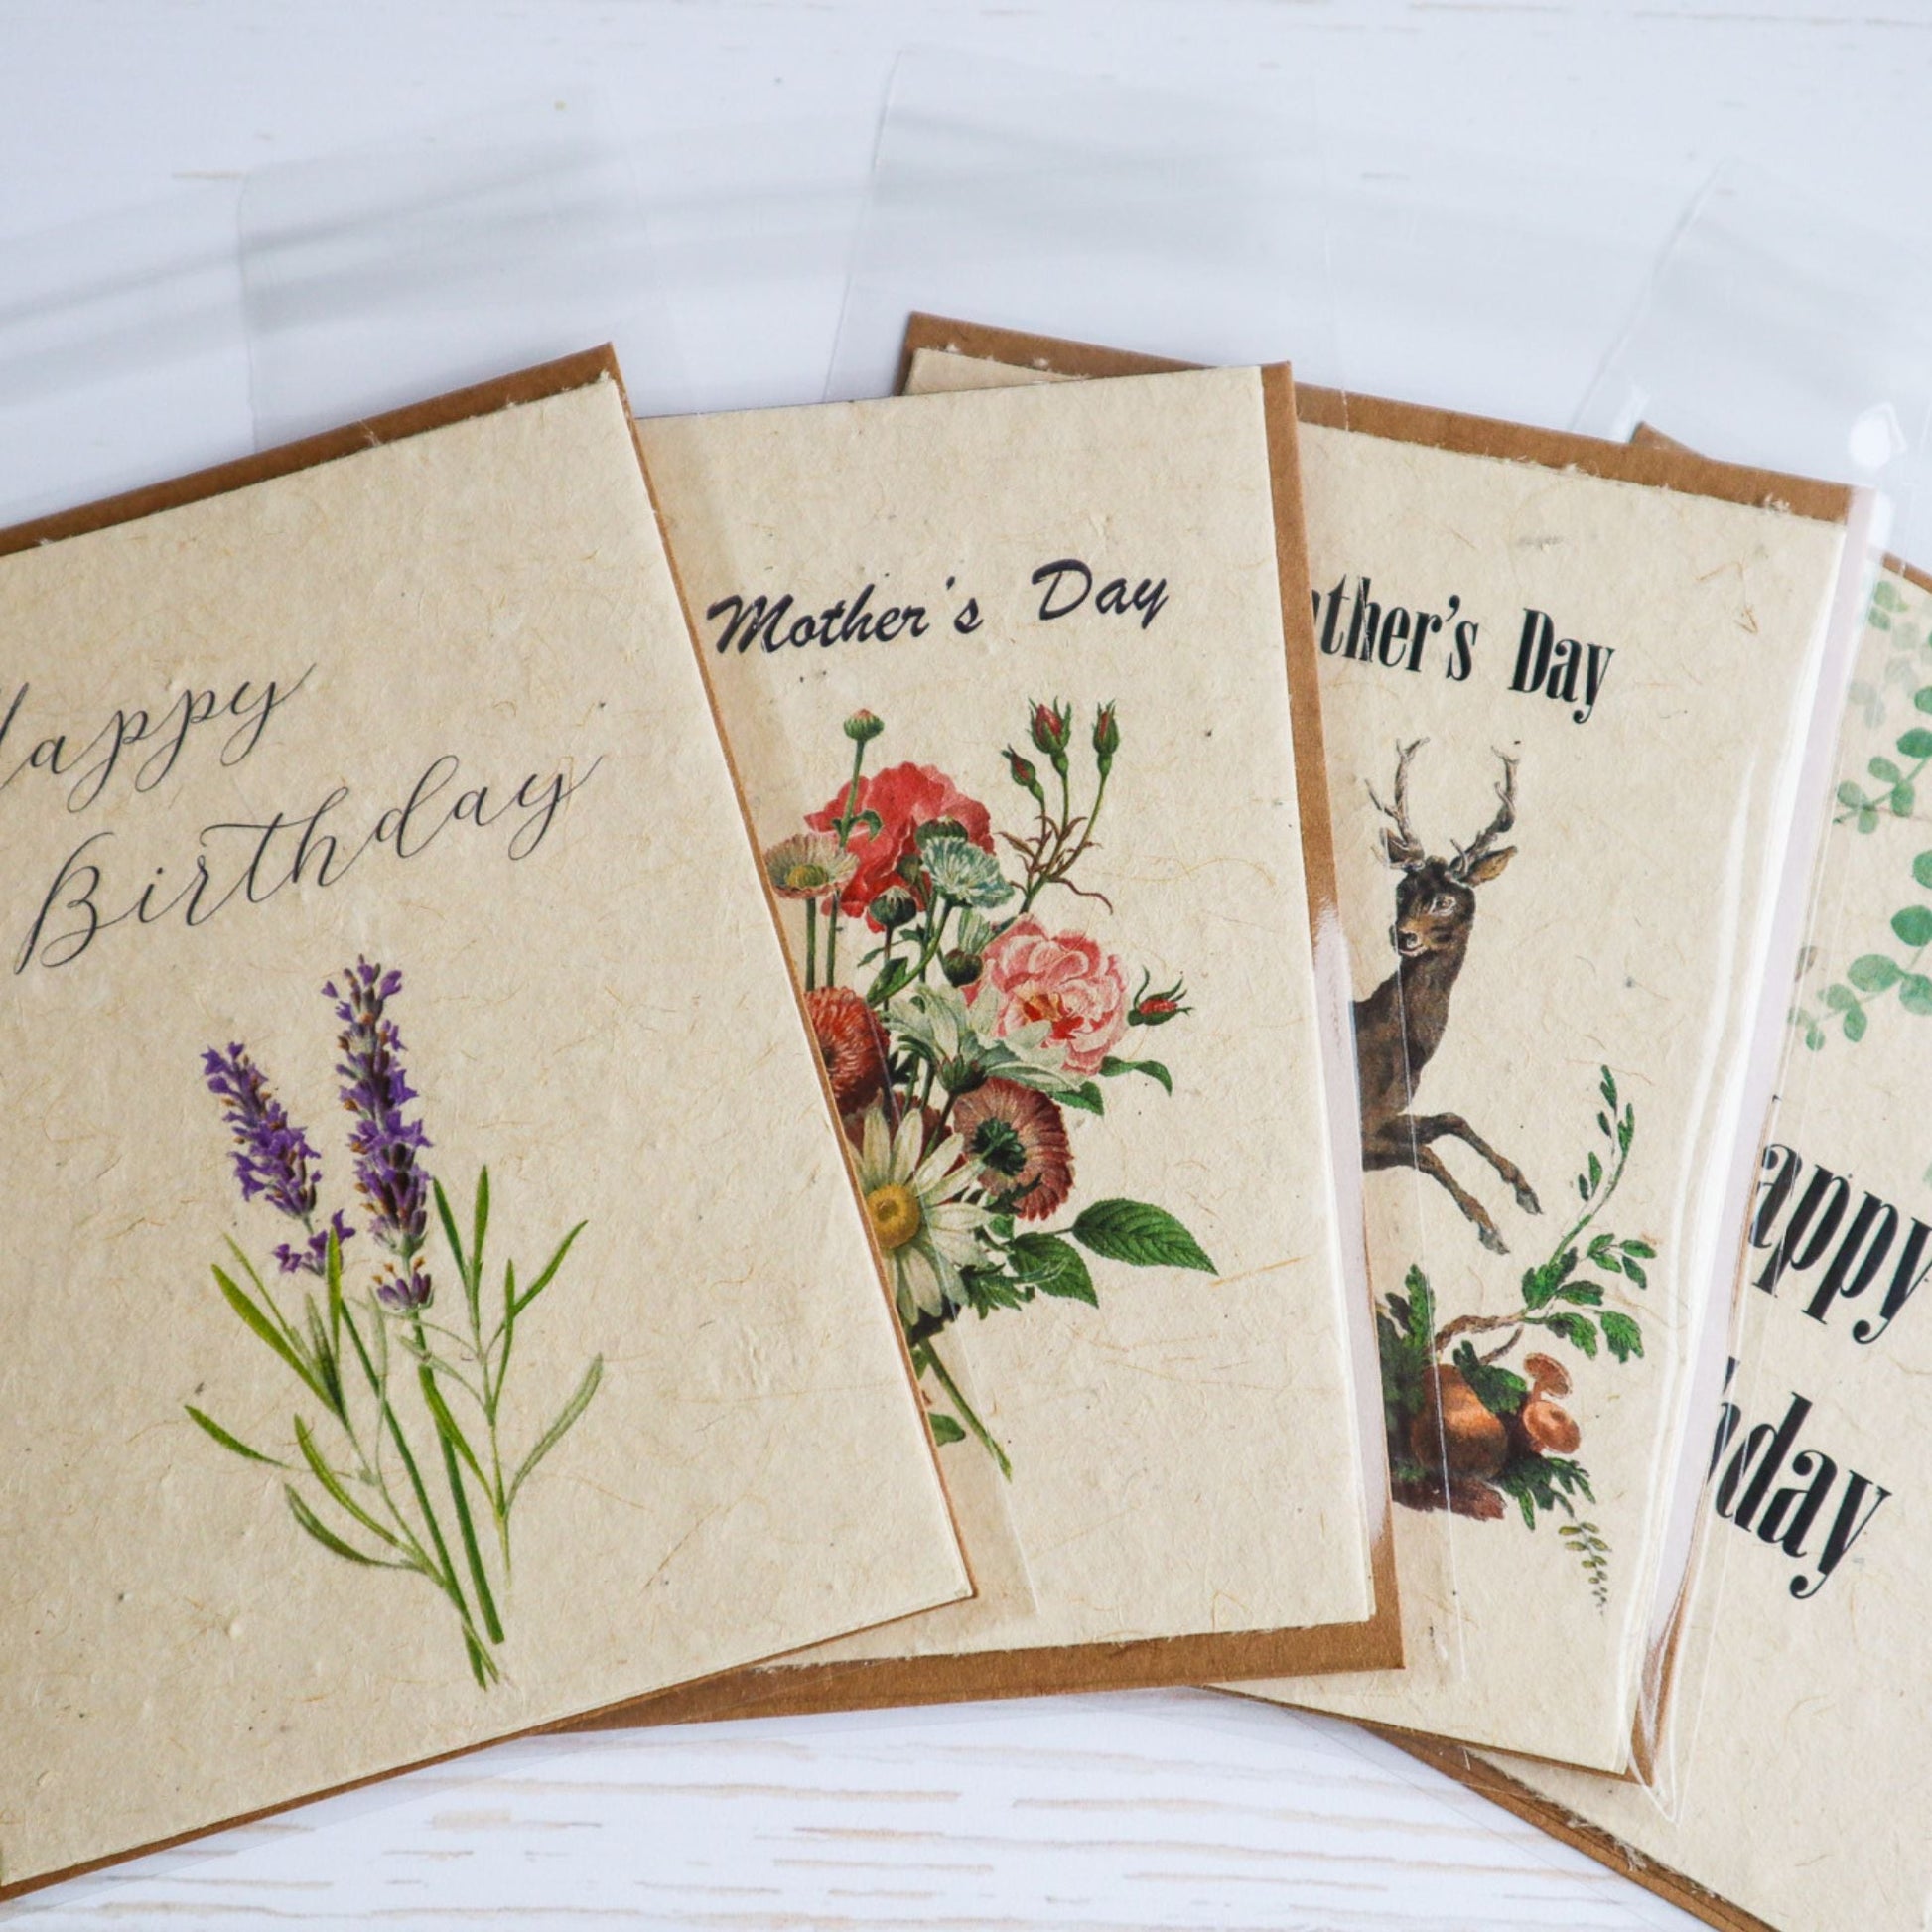 Plantable Greeting Card | Grow Shawty It's Your Birthday